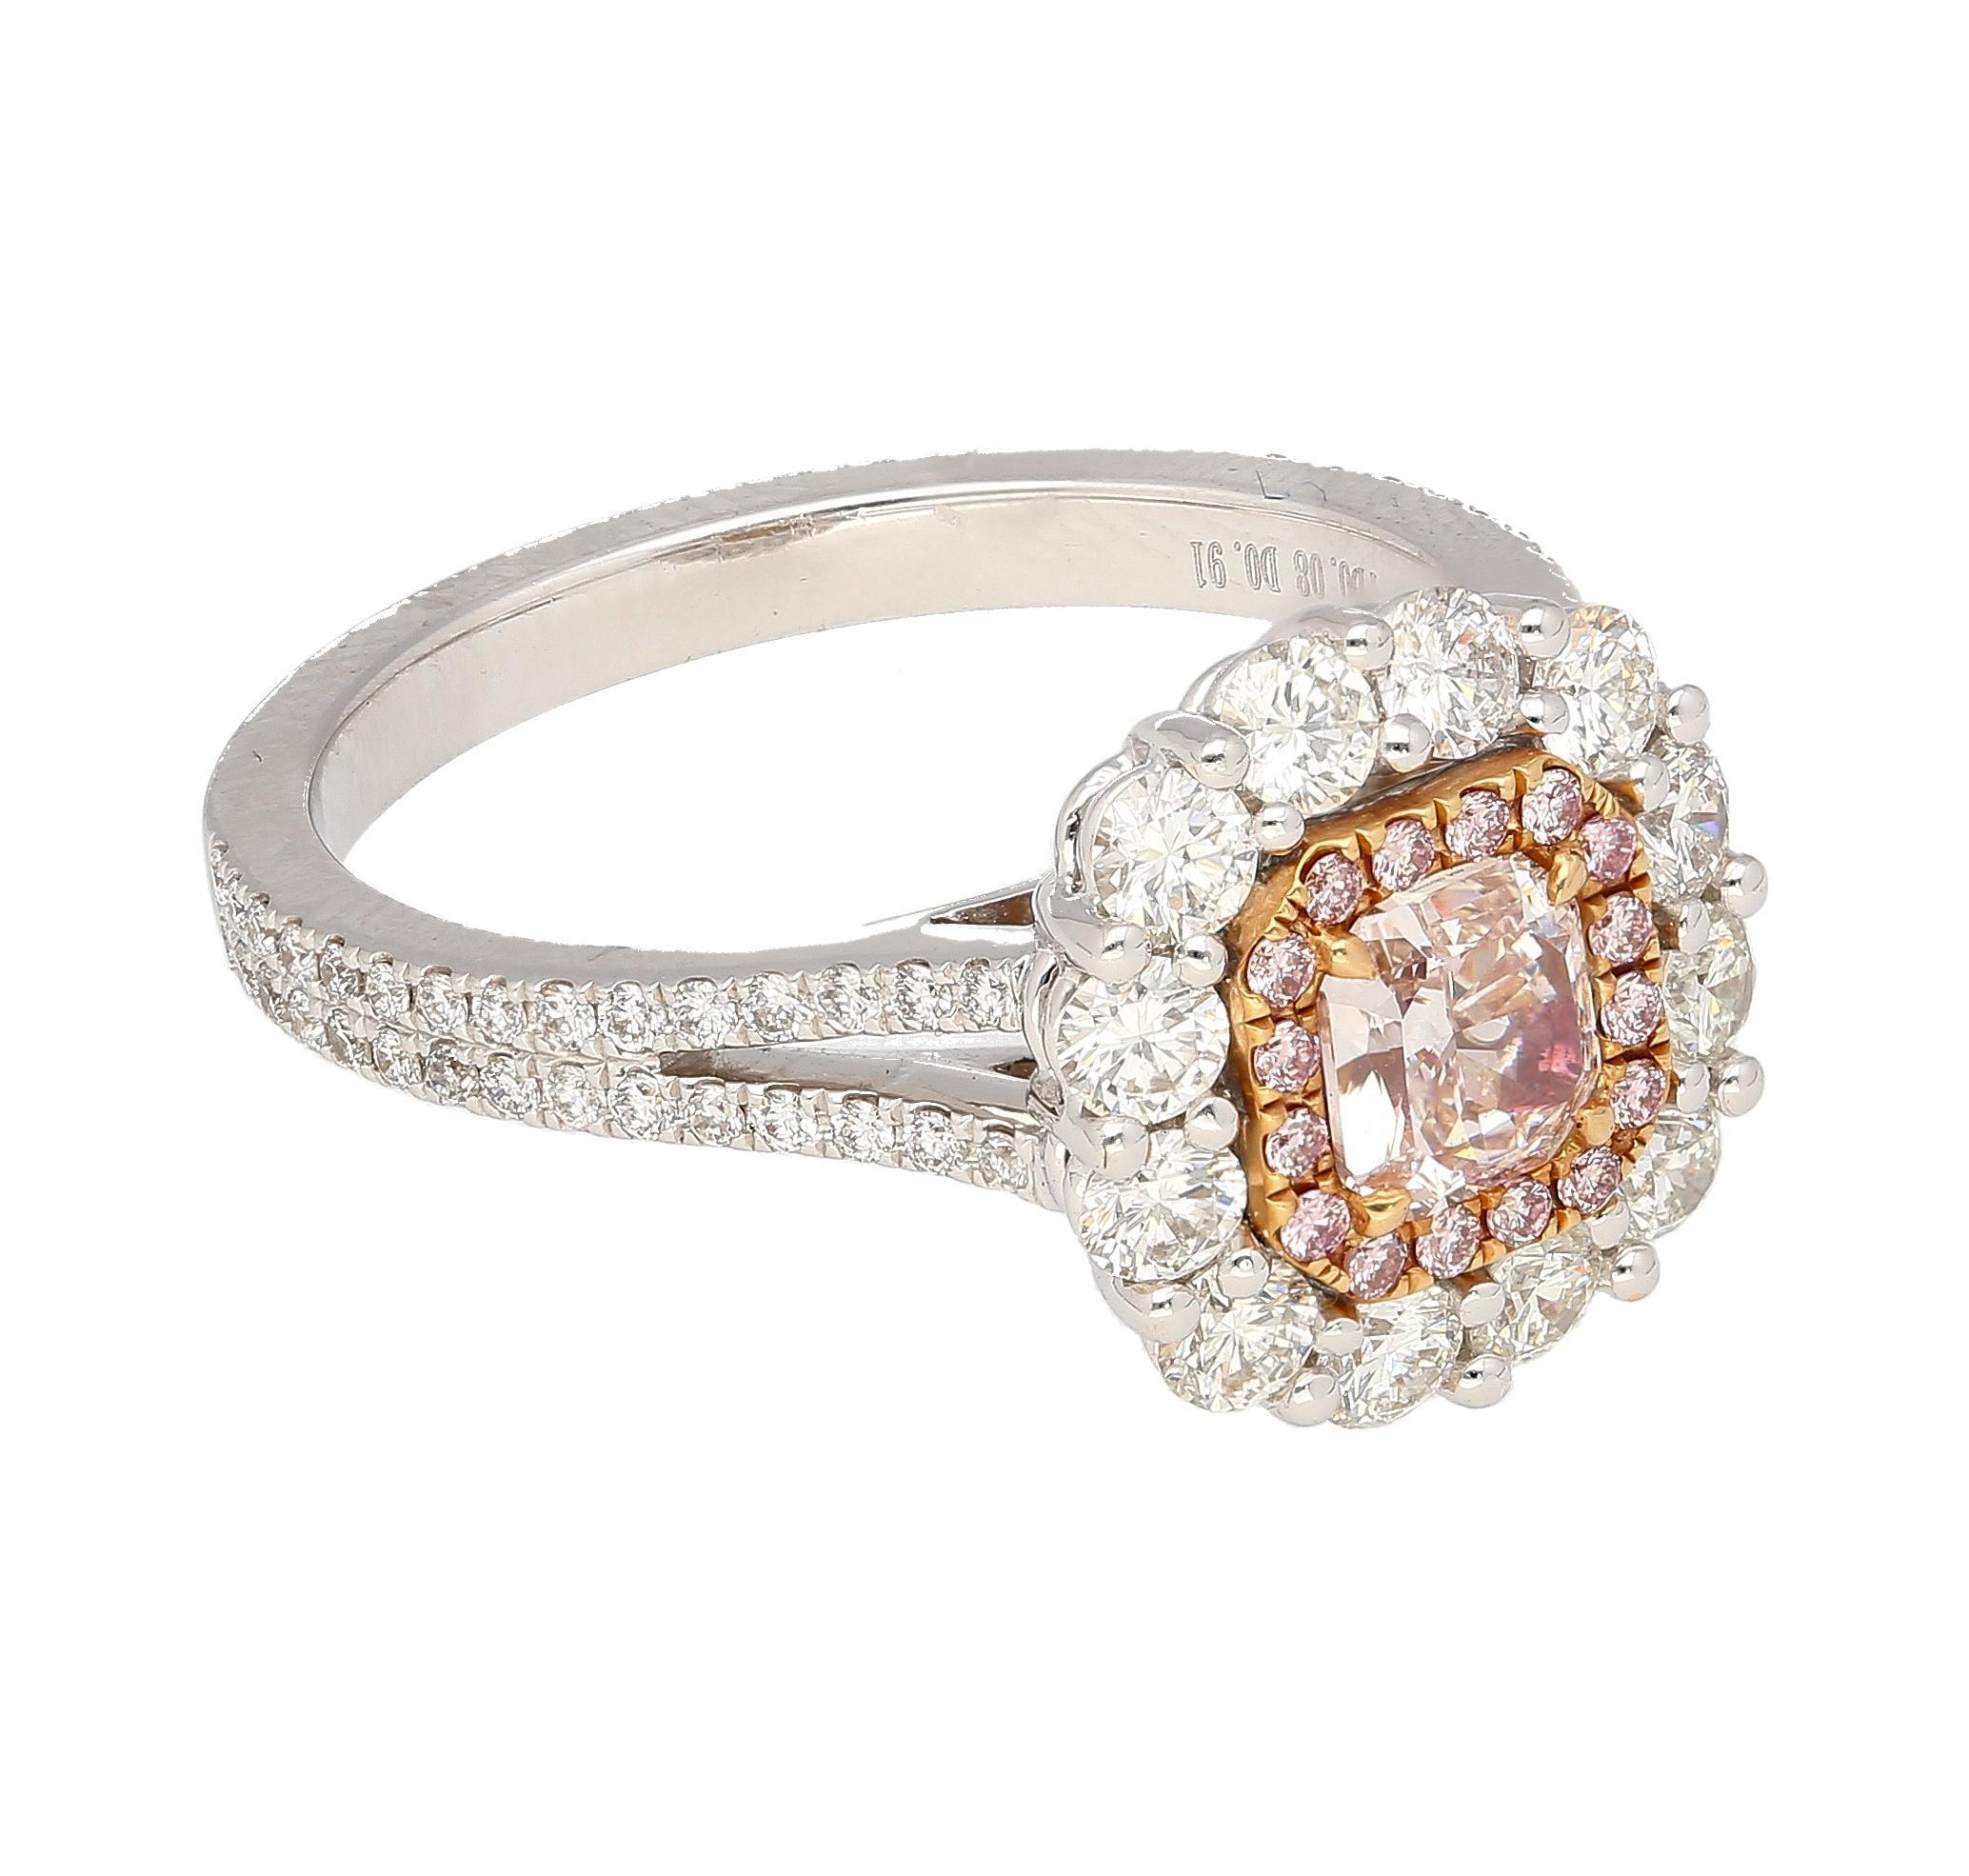 Contemporary GIA Certified 1.51 Carat Fancy Light Brown Pink Internally Flawless Diamond Ring For Sale